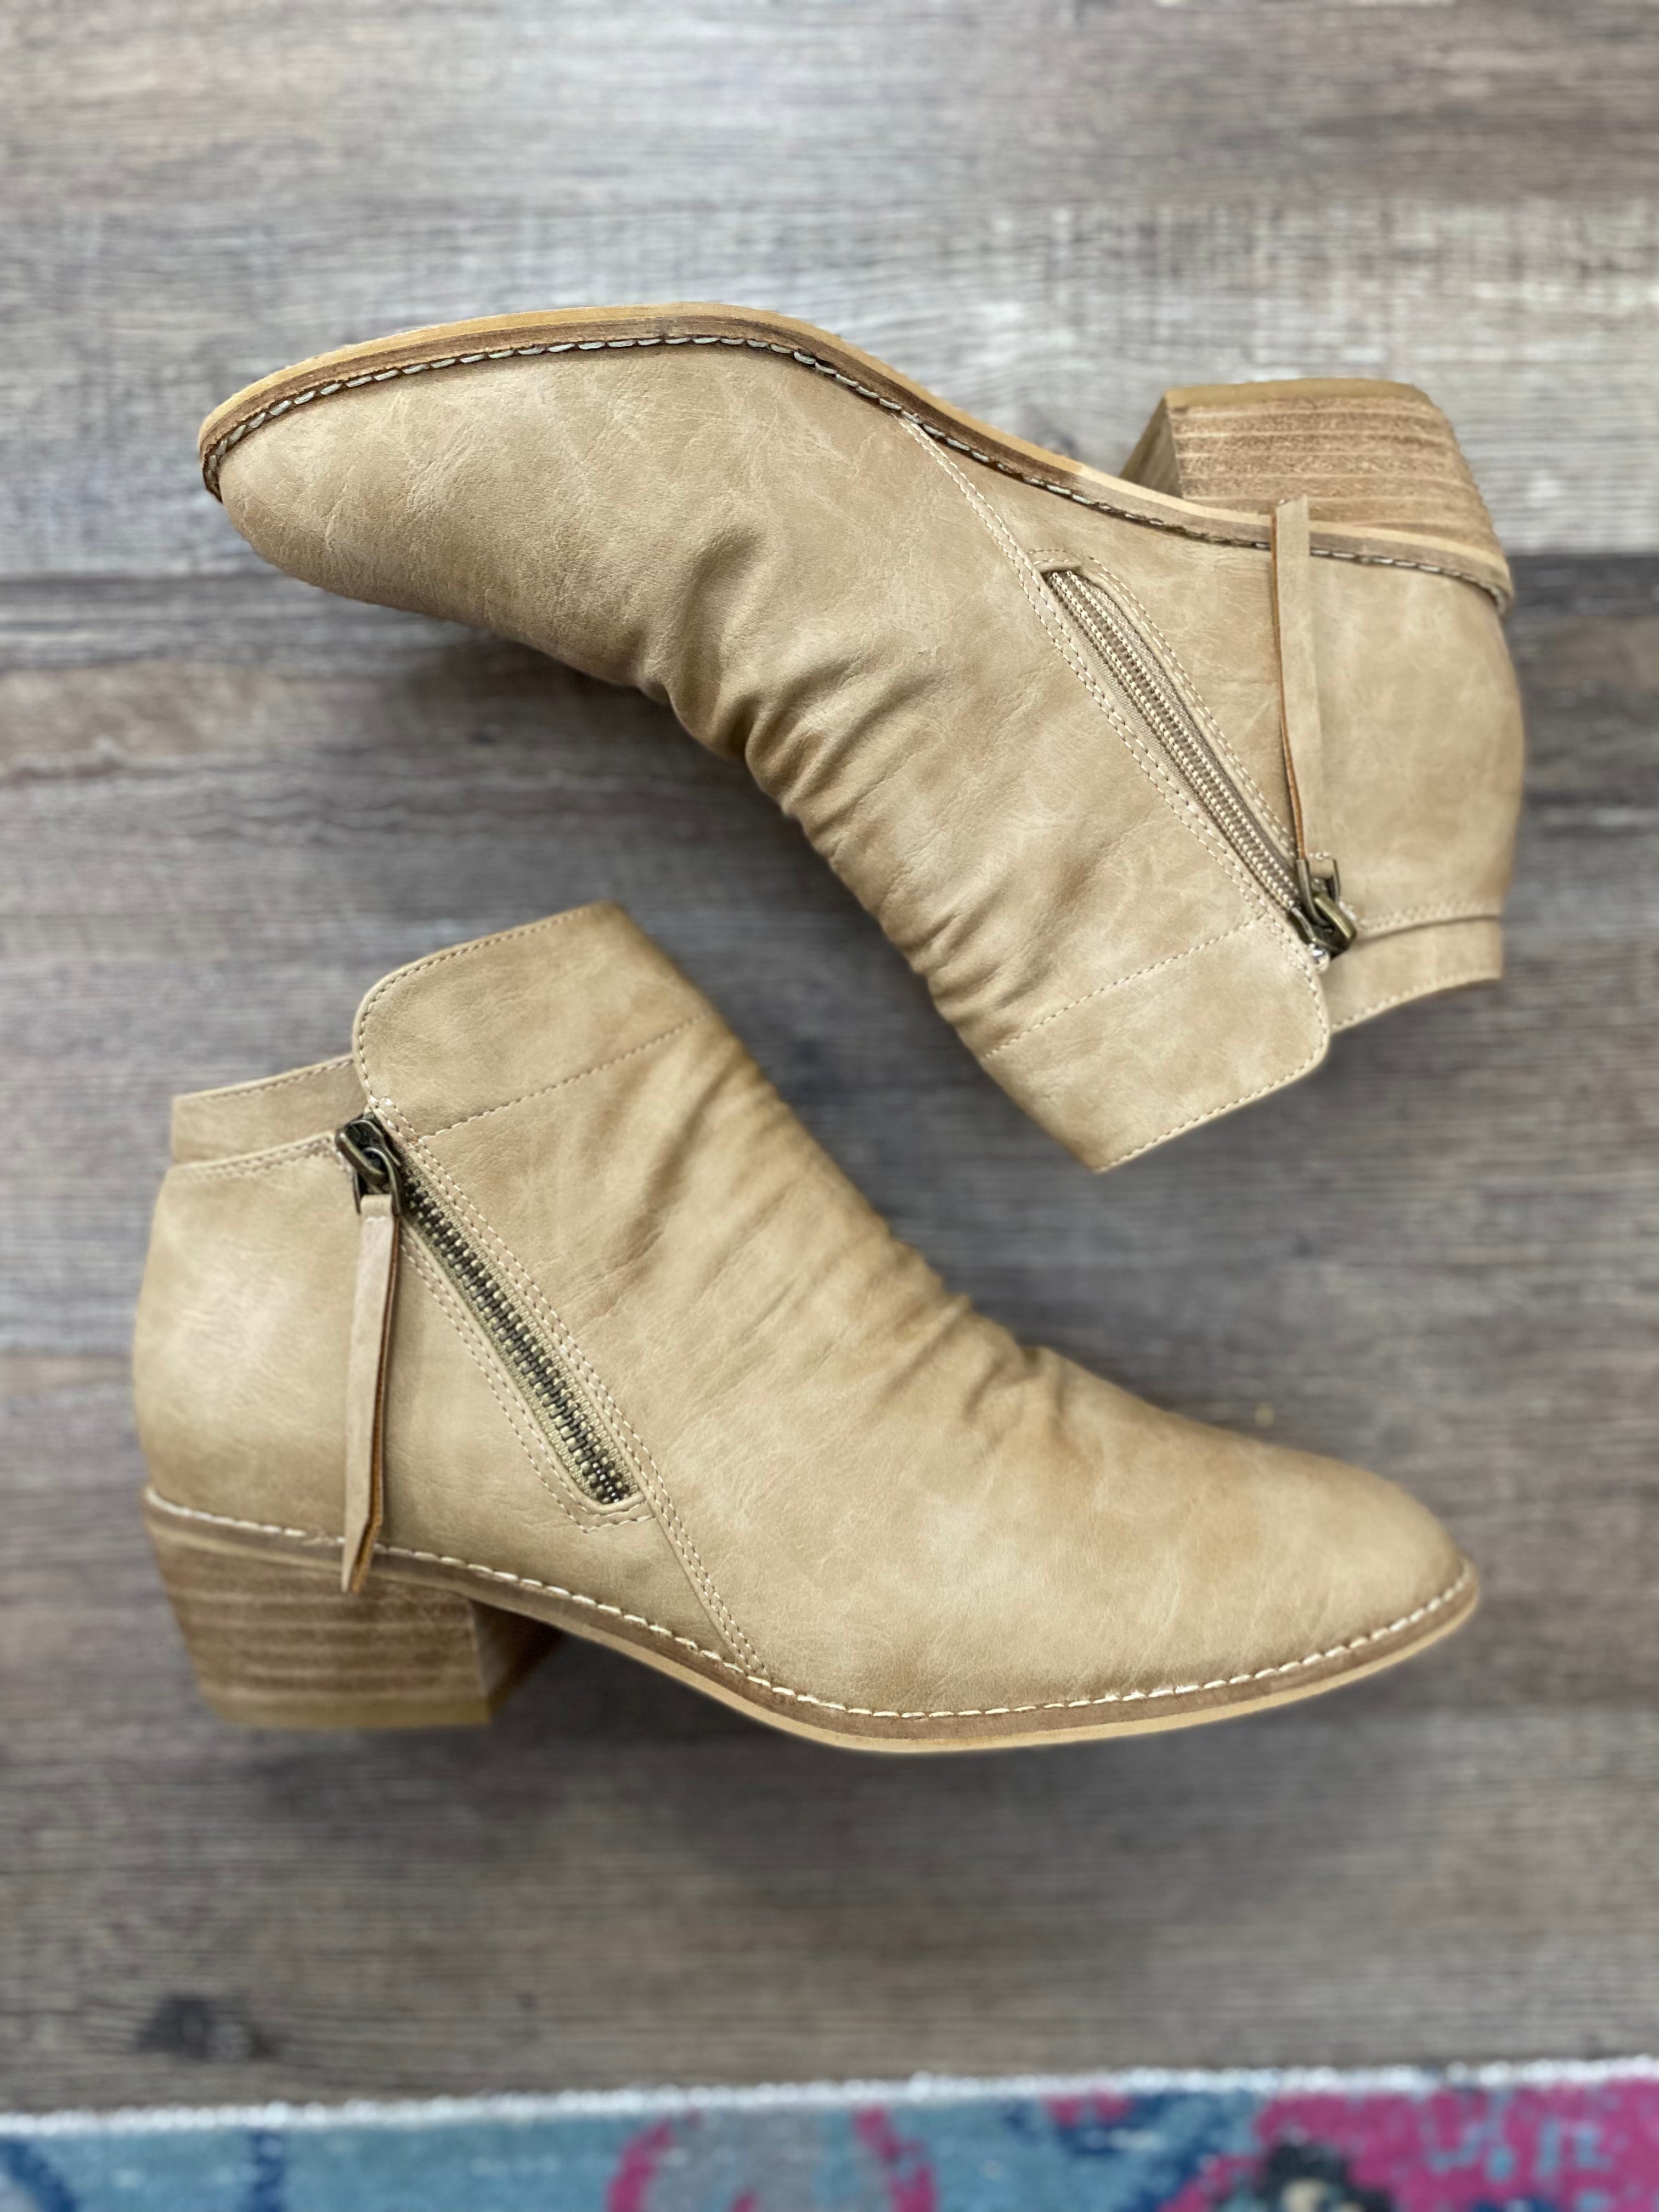 Butternut-Taupe Boots